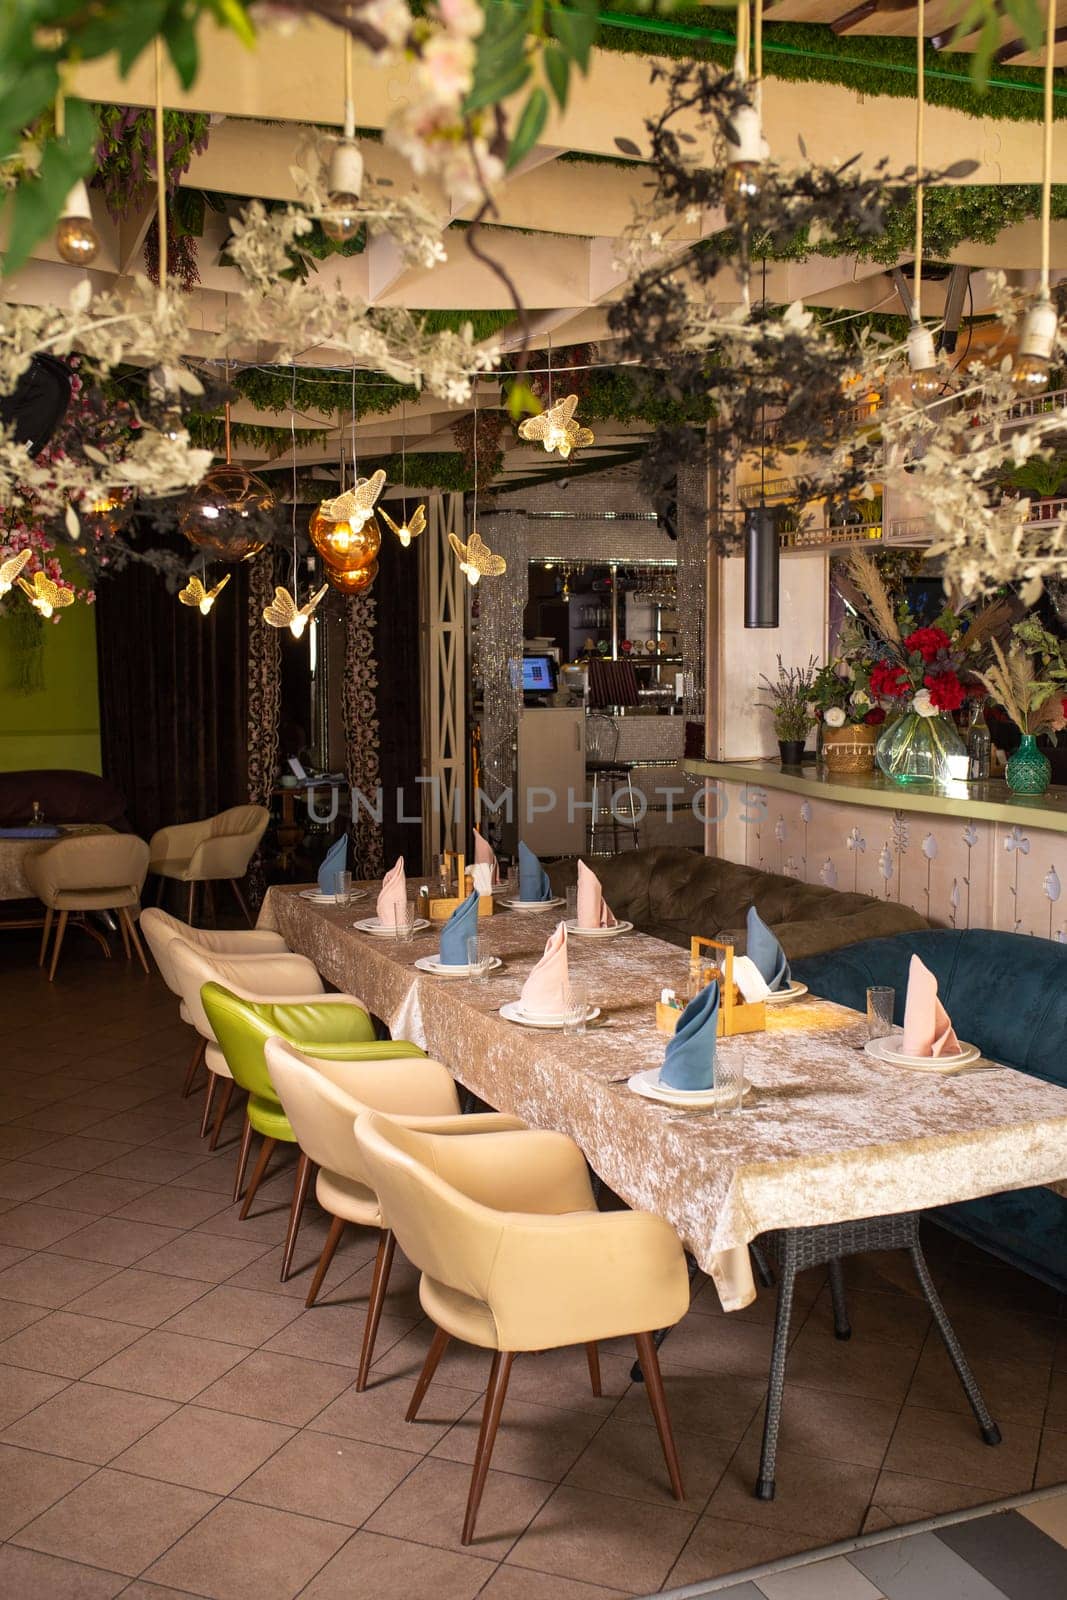 Modern restaurant design with nature touch. Green plants, flowers on walls and ceiling. Long table with glasses, cloth napkins.